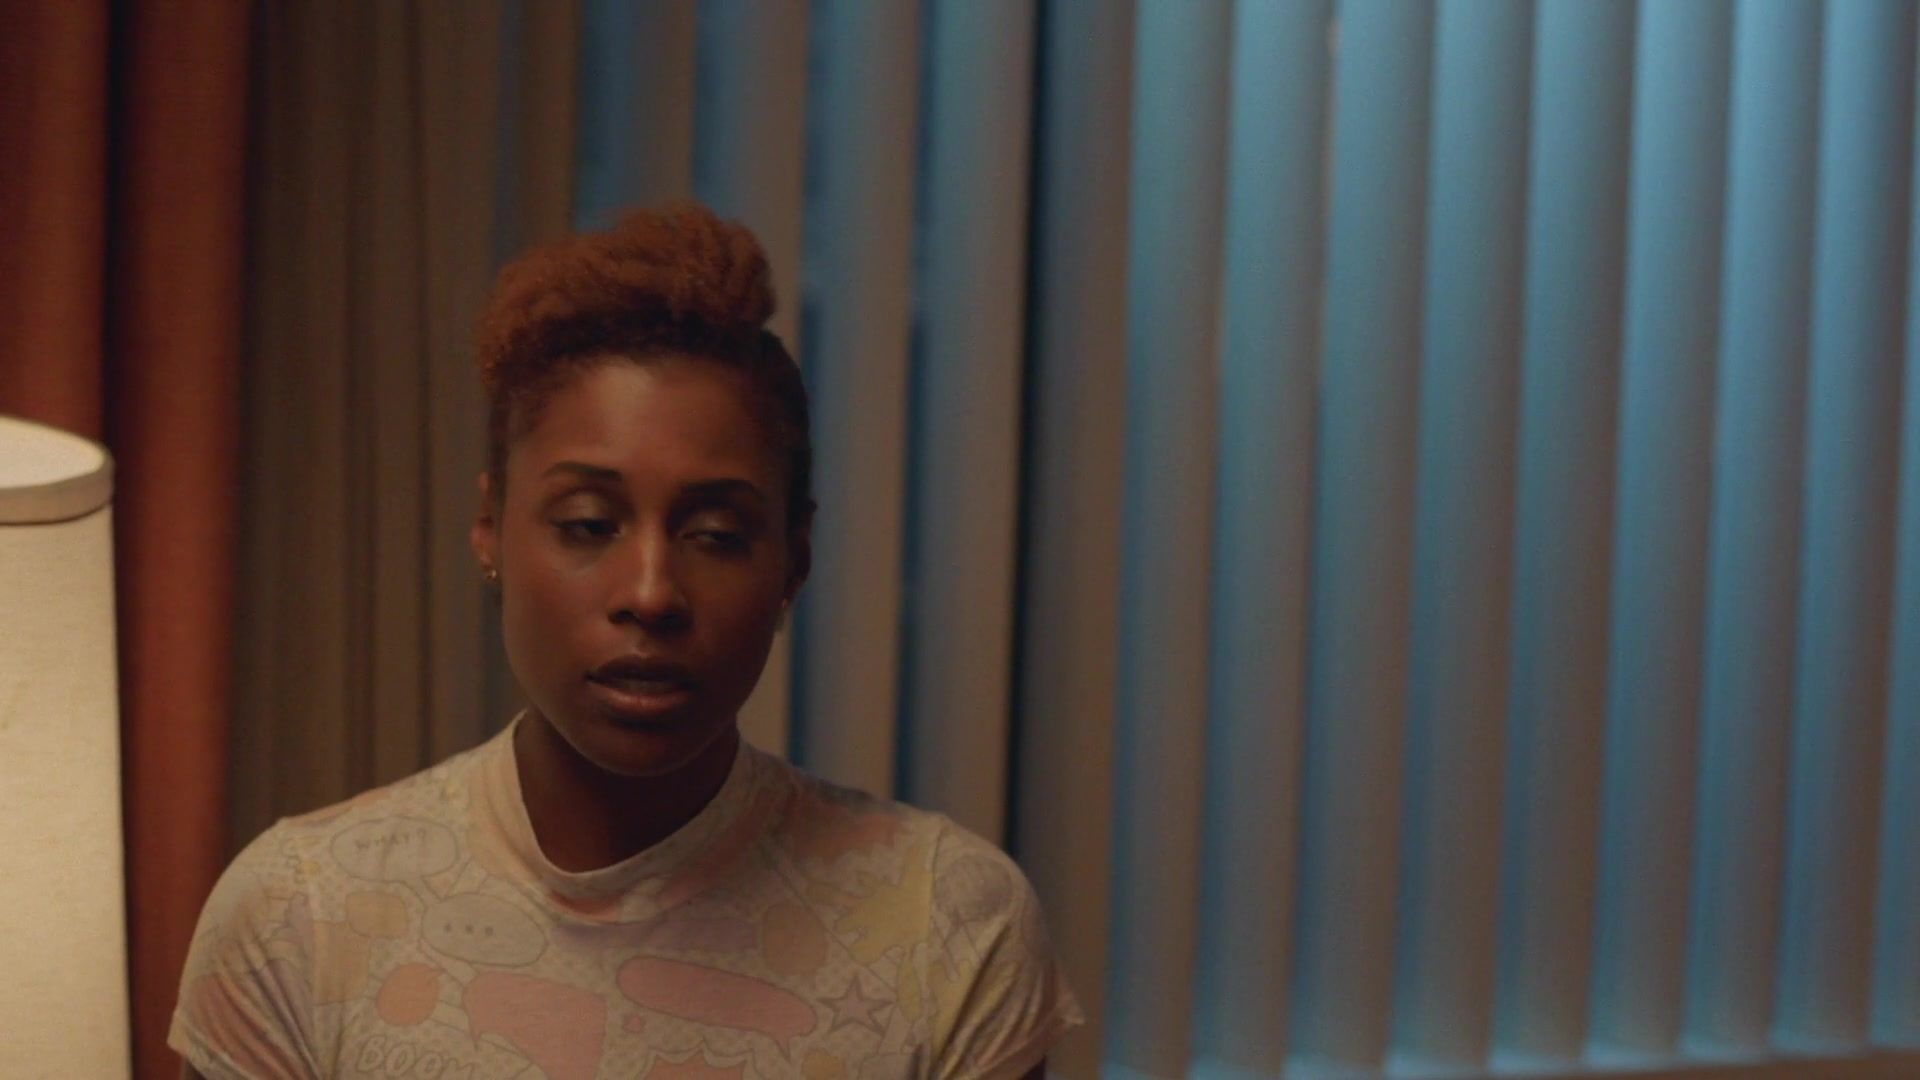 Sexy Girl Domnique Perry nude, Issa Rae Nude - Insecure s02e01 (2017) Reality - 1